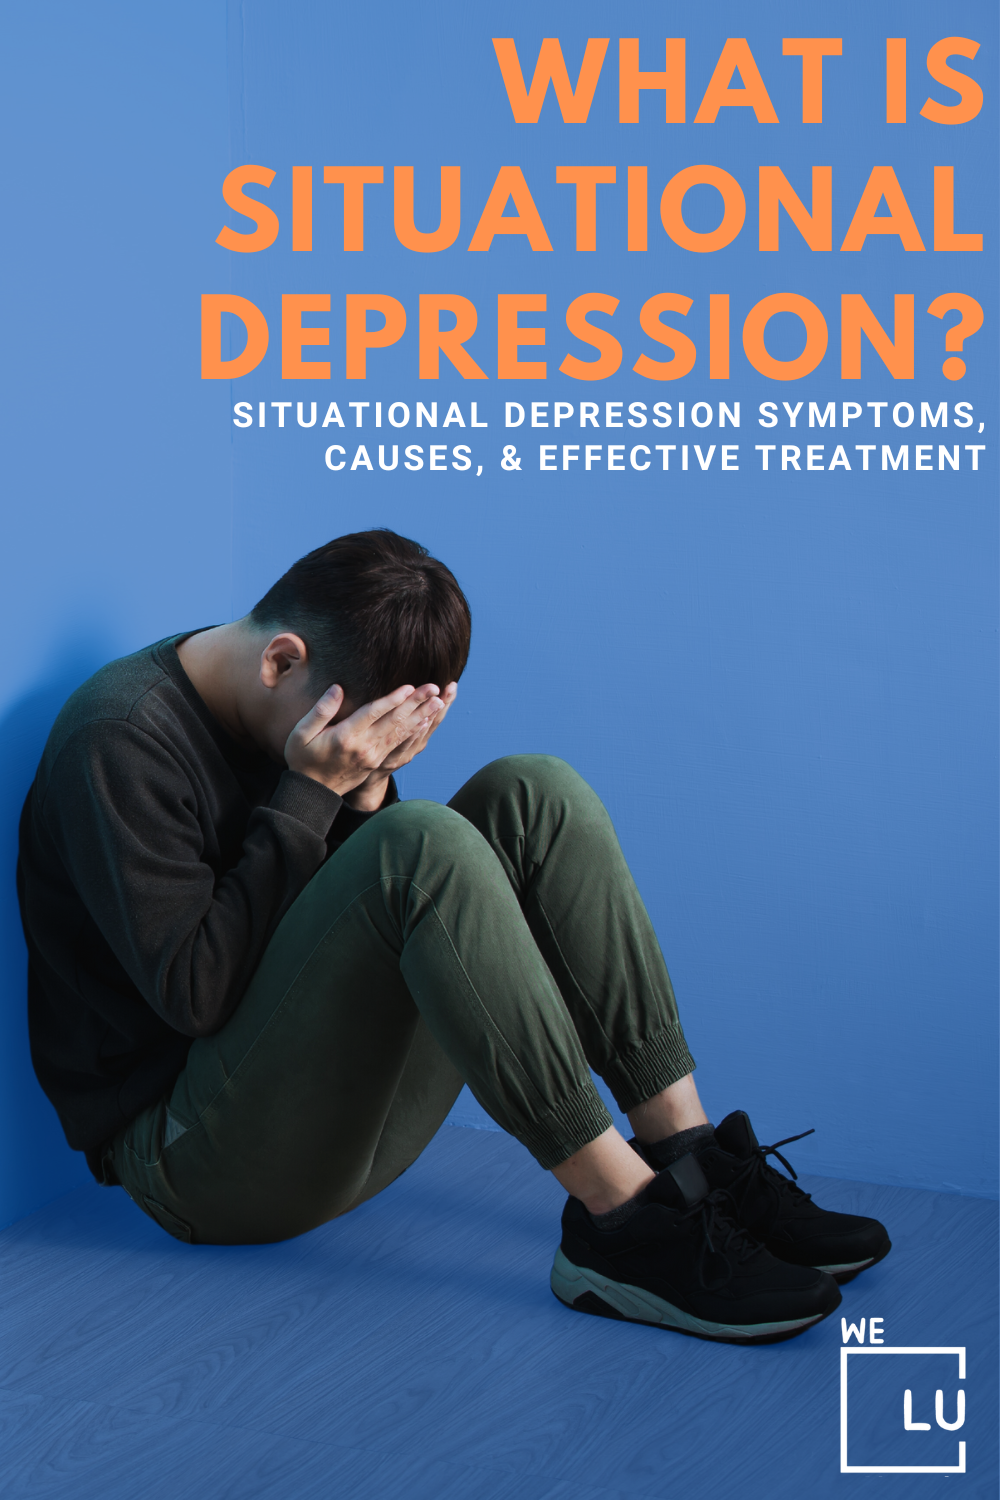 Clinical Depression Causes, Symptoms, Types, & Treatment